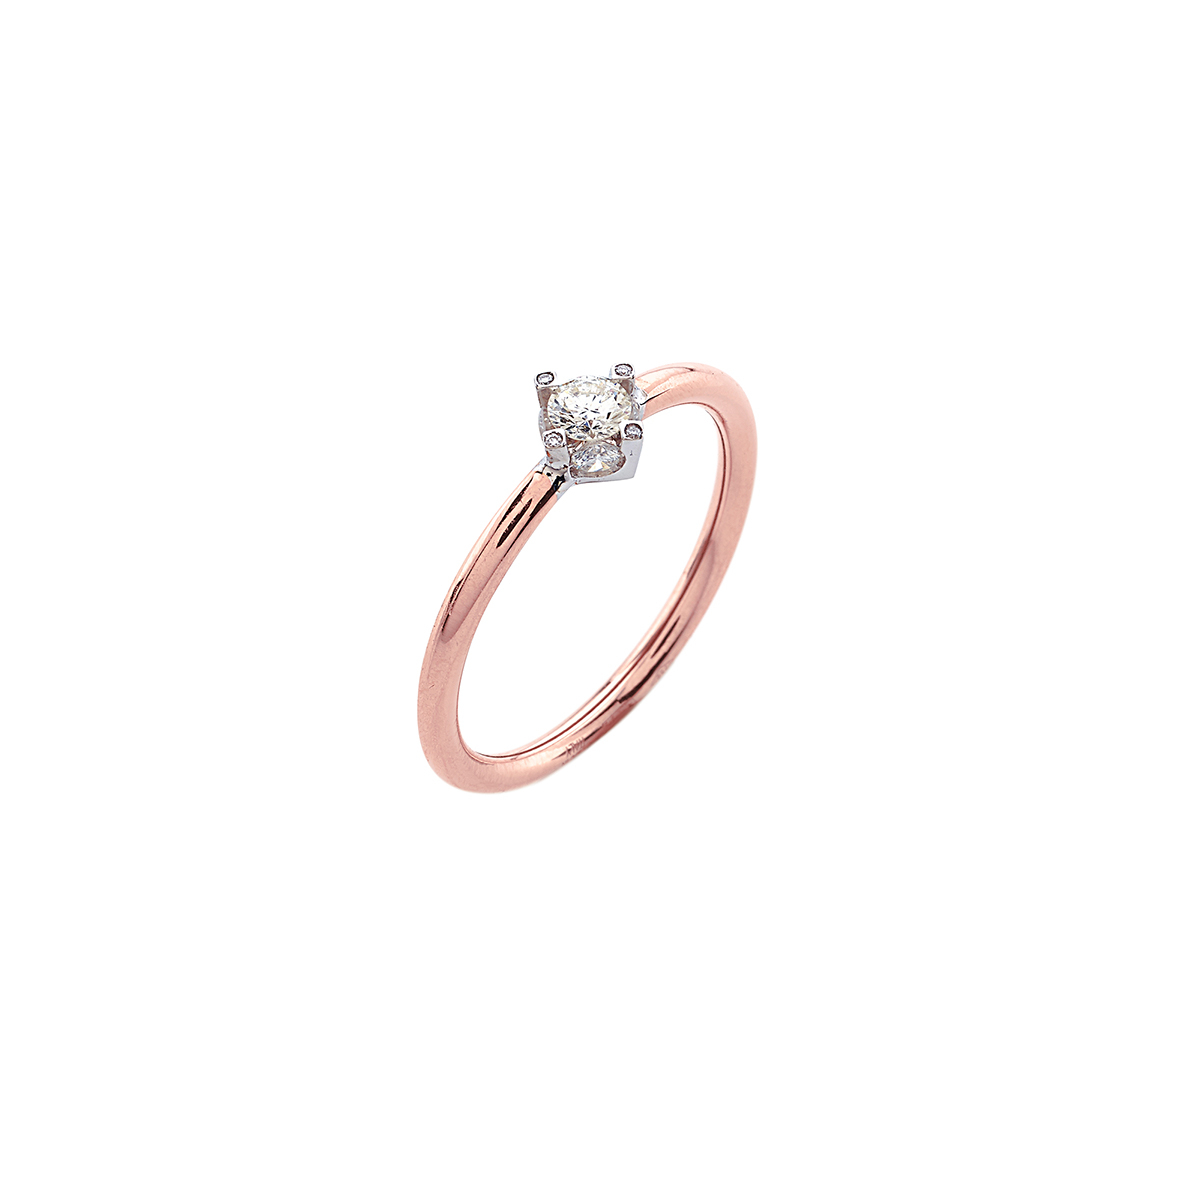 4D Diamond Solitaire Ring in 18K Rose Gold